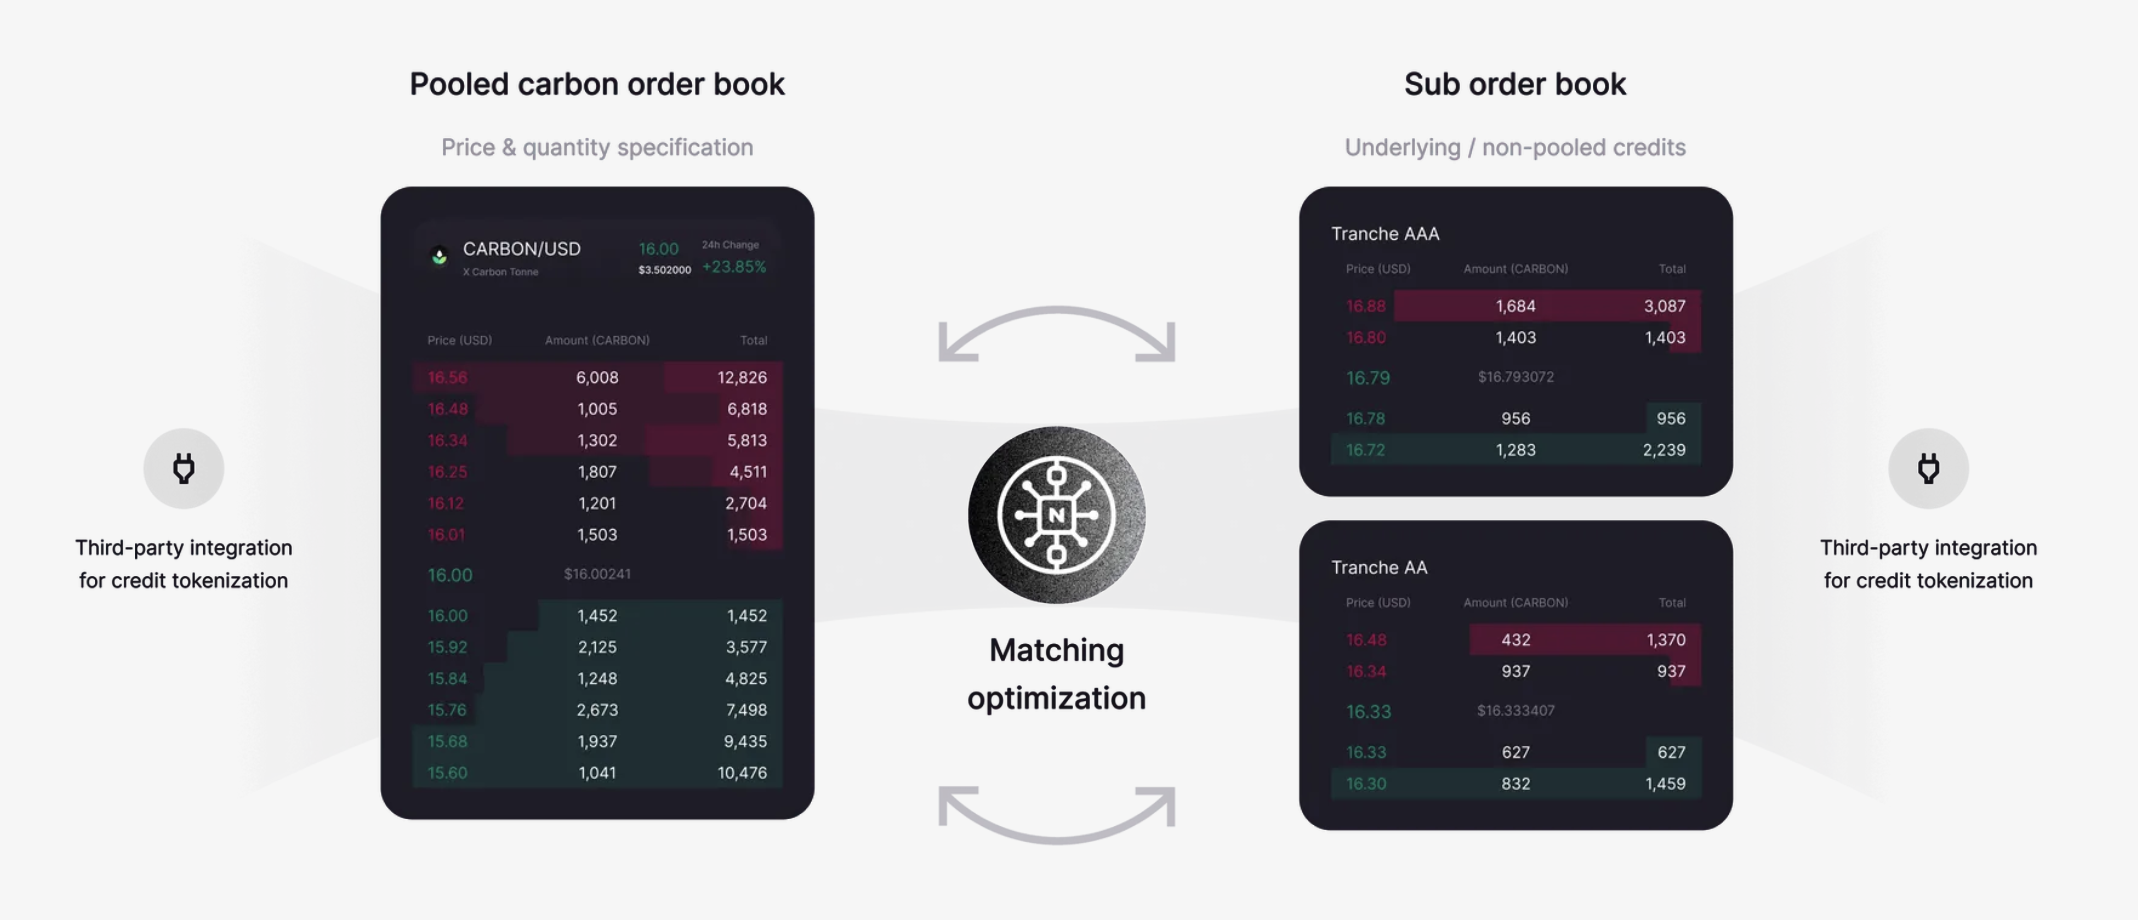 Neutral is a specialized market infrastructure that in some respects, feels like an intents-based marketplace for environmental assets. With Neutral, users can specify the material qualities for their order. Source: Screenshot from the Neutral website (https://www.neutralx.com/platform), used under a fair use rationale.